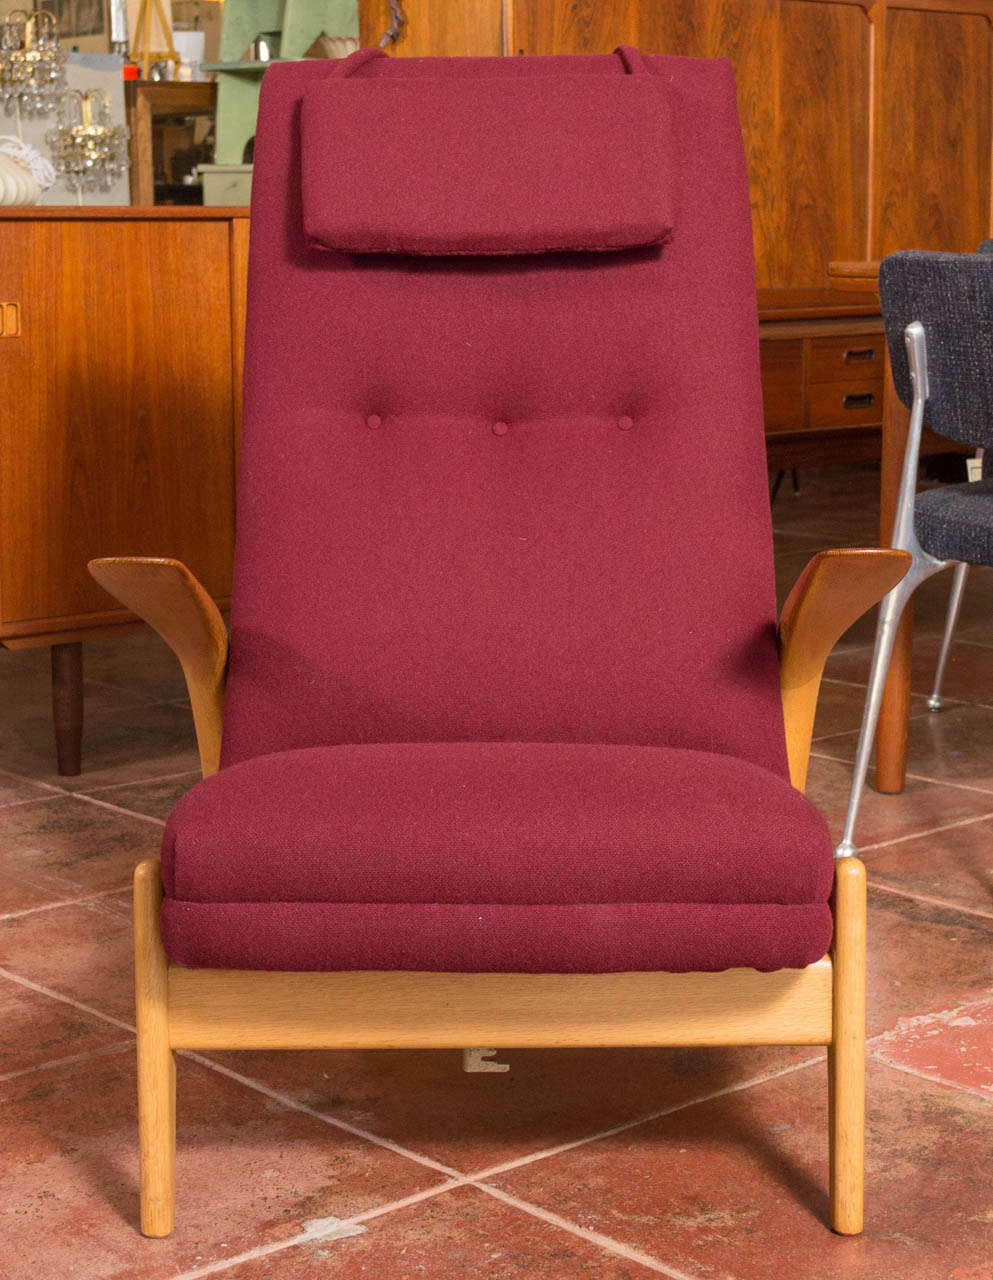 Offering an uncommon and very comfortable high back easy chair by Gimson and Slater LTD. Was designed in Norway and manufactured in England  The chair allows you to rock back and forth or with a handle on the side allows you to lock in the seat at